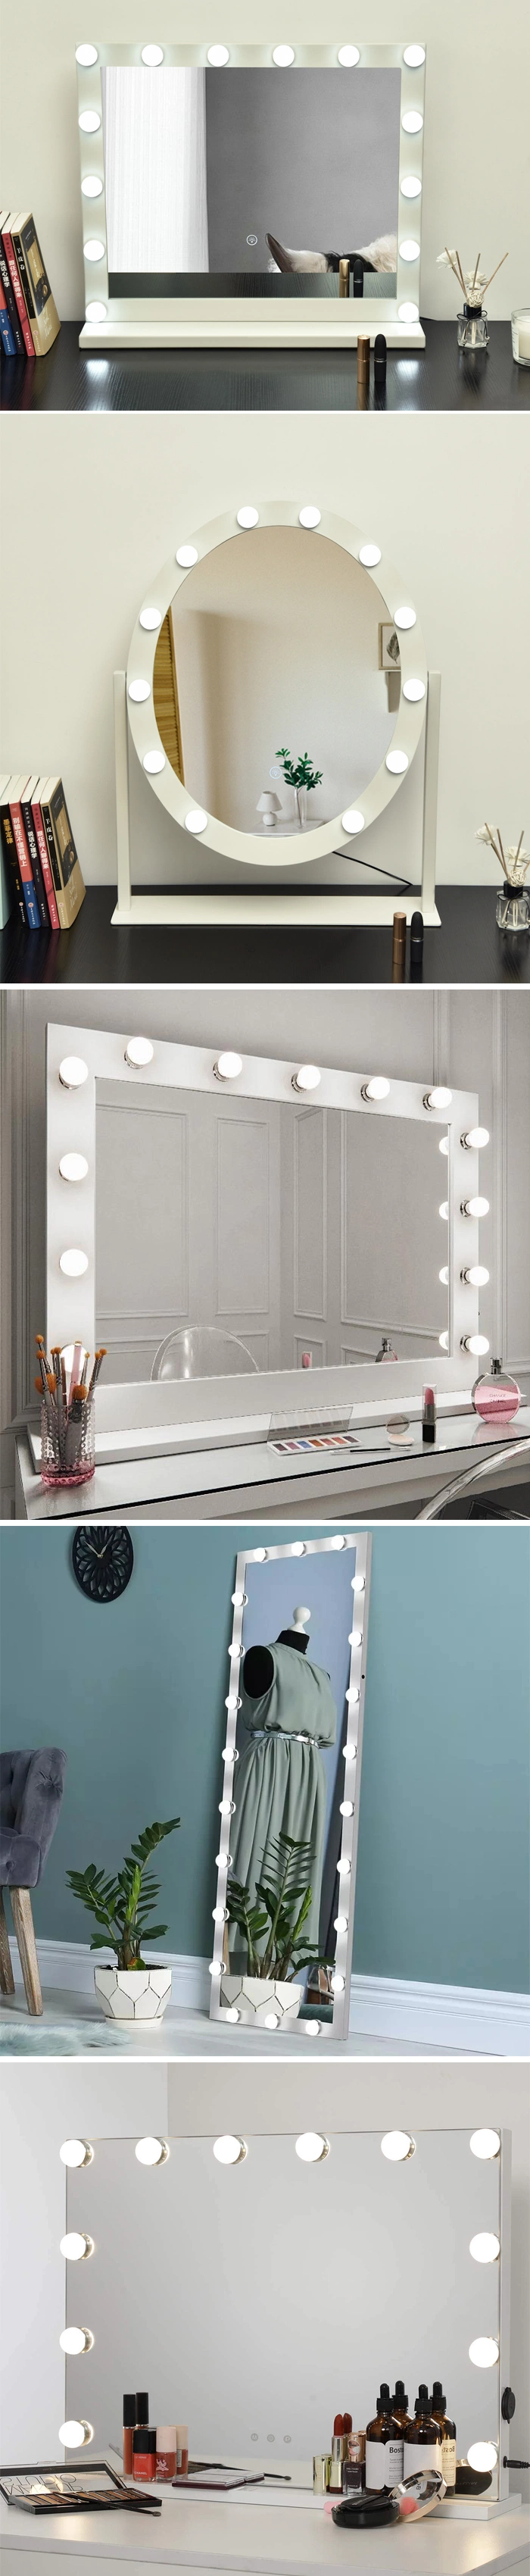 Ortonbath Vanity Make up Mirror with Lights Hollywood Lighted Makeup Mirror with Dimmable LED Bulbs for Dressing Room &amp; Bedroom Tabletop